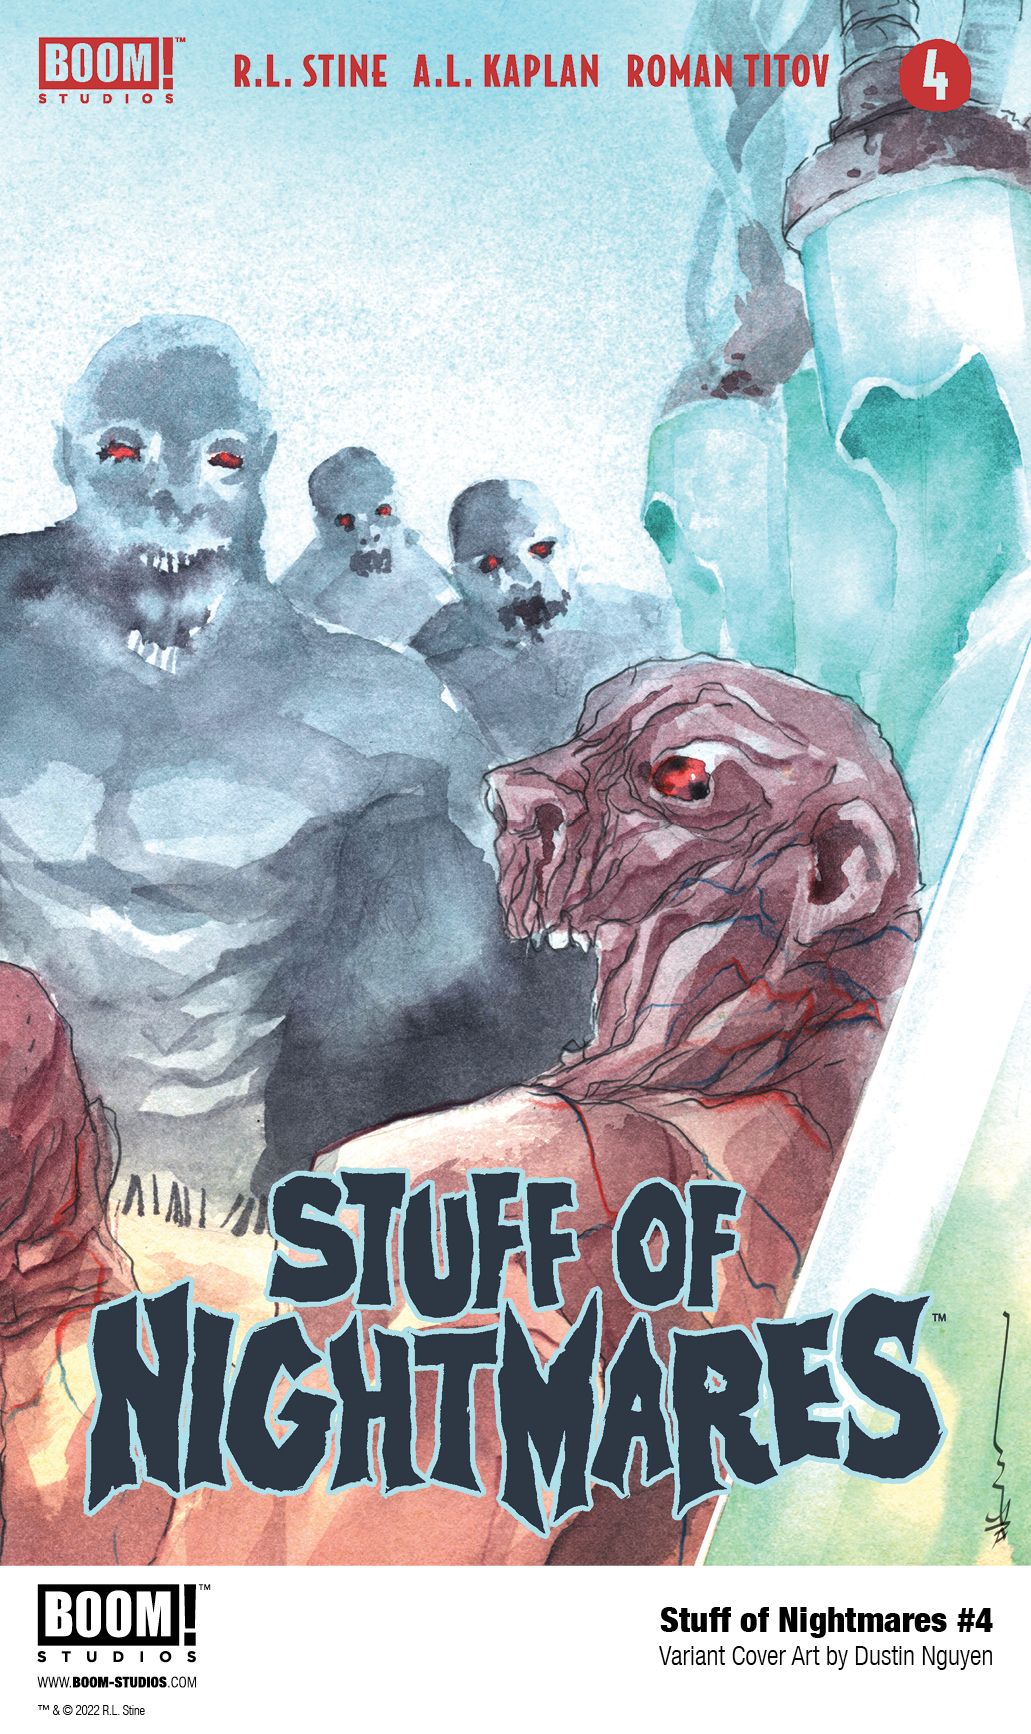 No One is Safe in R.L. Stine's Stuff of Nightmares Finale!